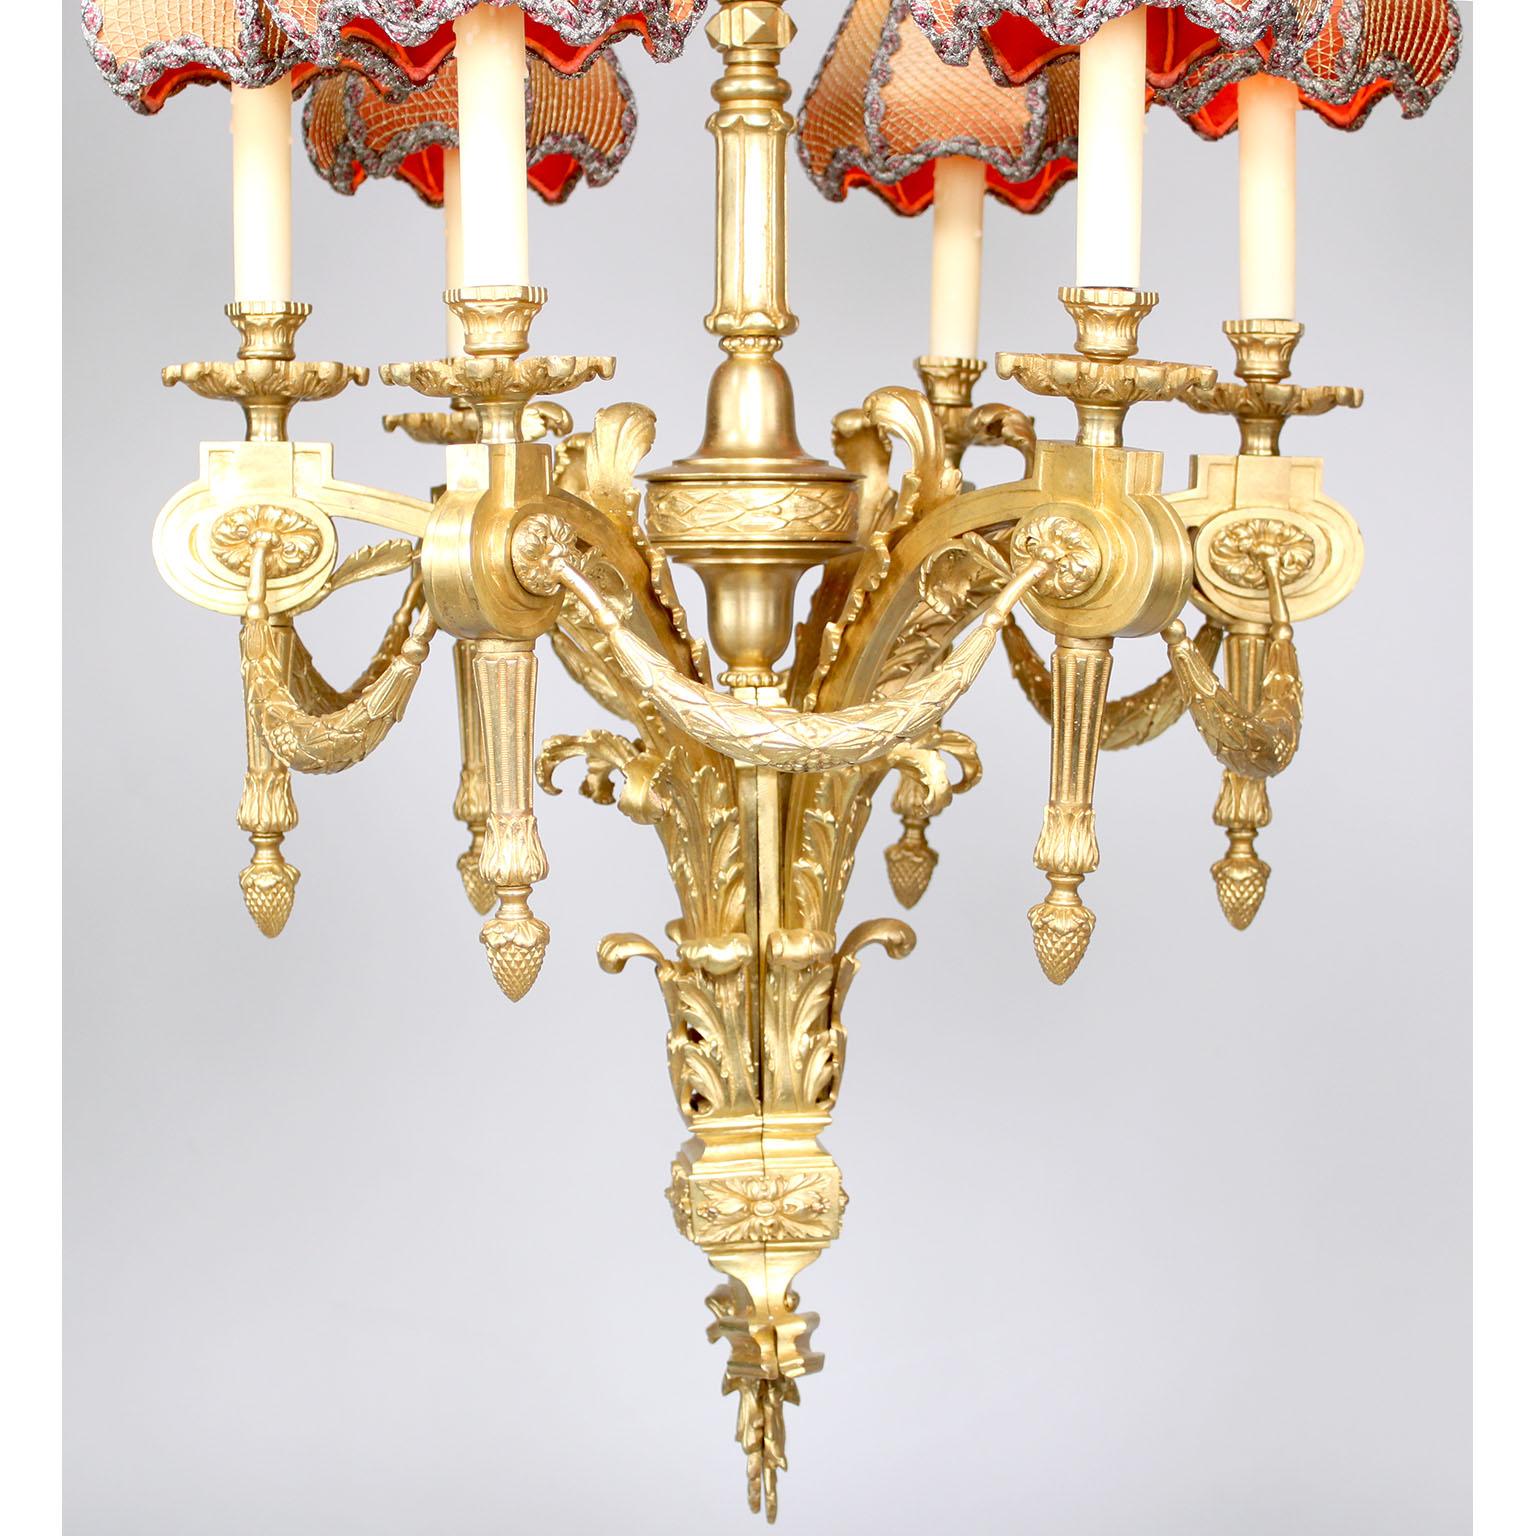 French 19th-20th Century Louis XVI Style Gilt Bronze Six-Light Chandelier For Sale 3